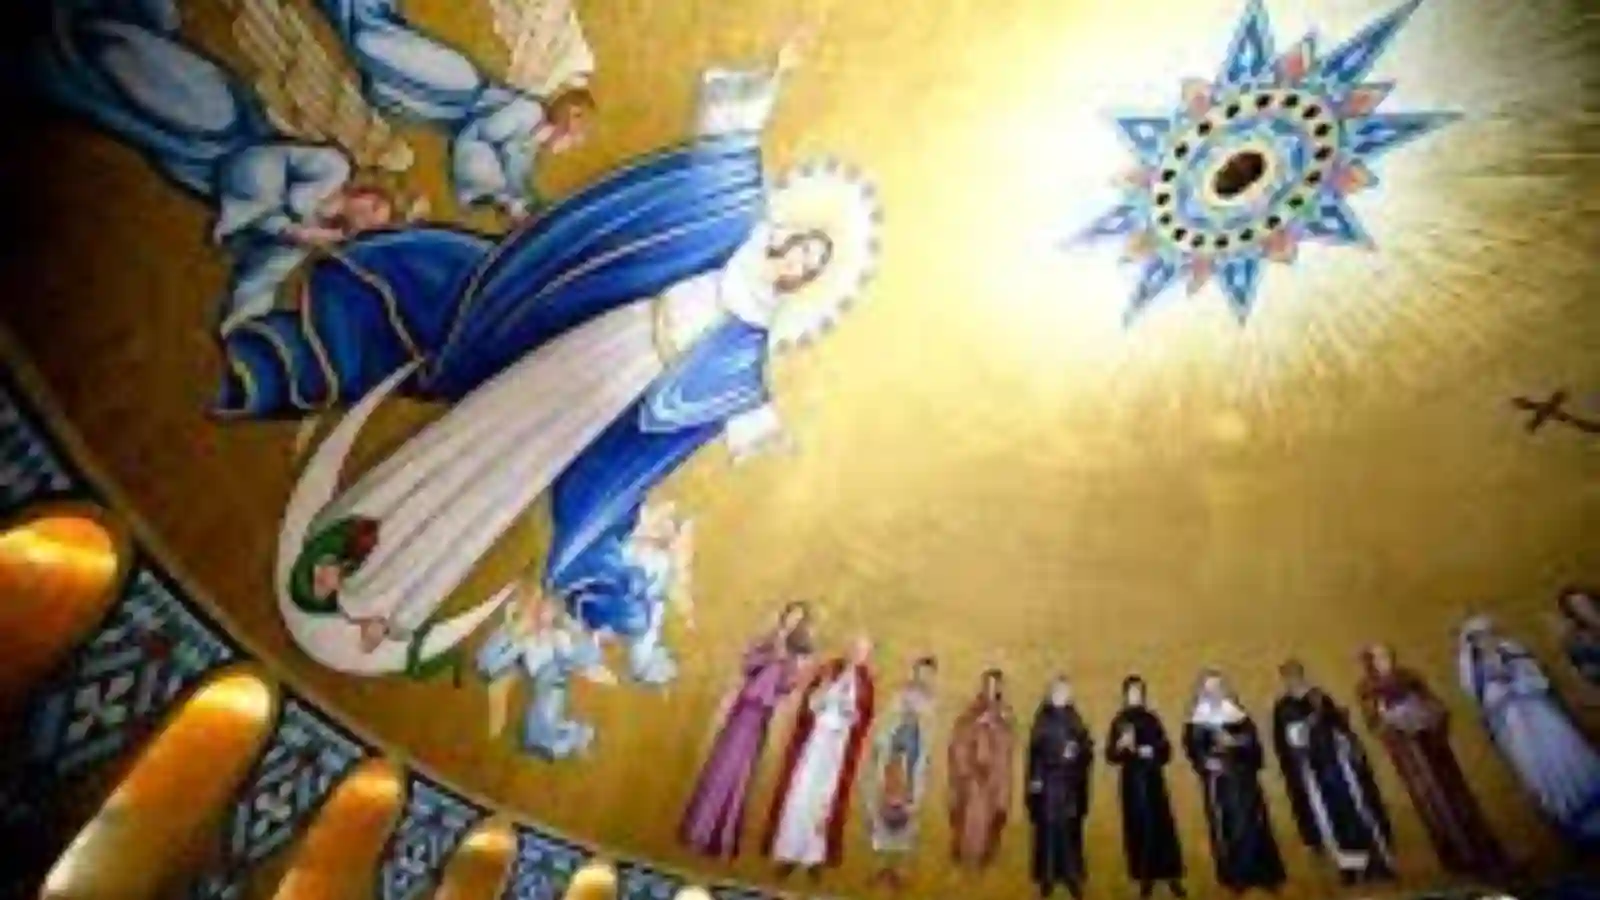 feast of the immaculate conception